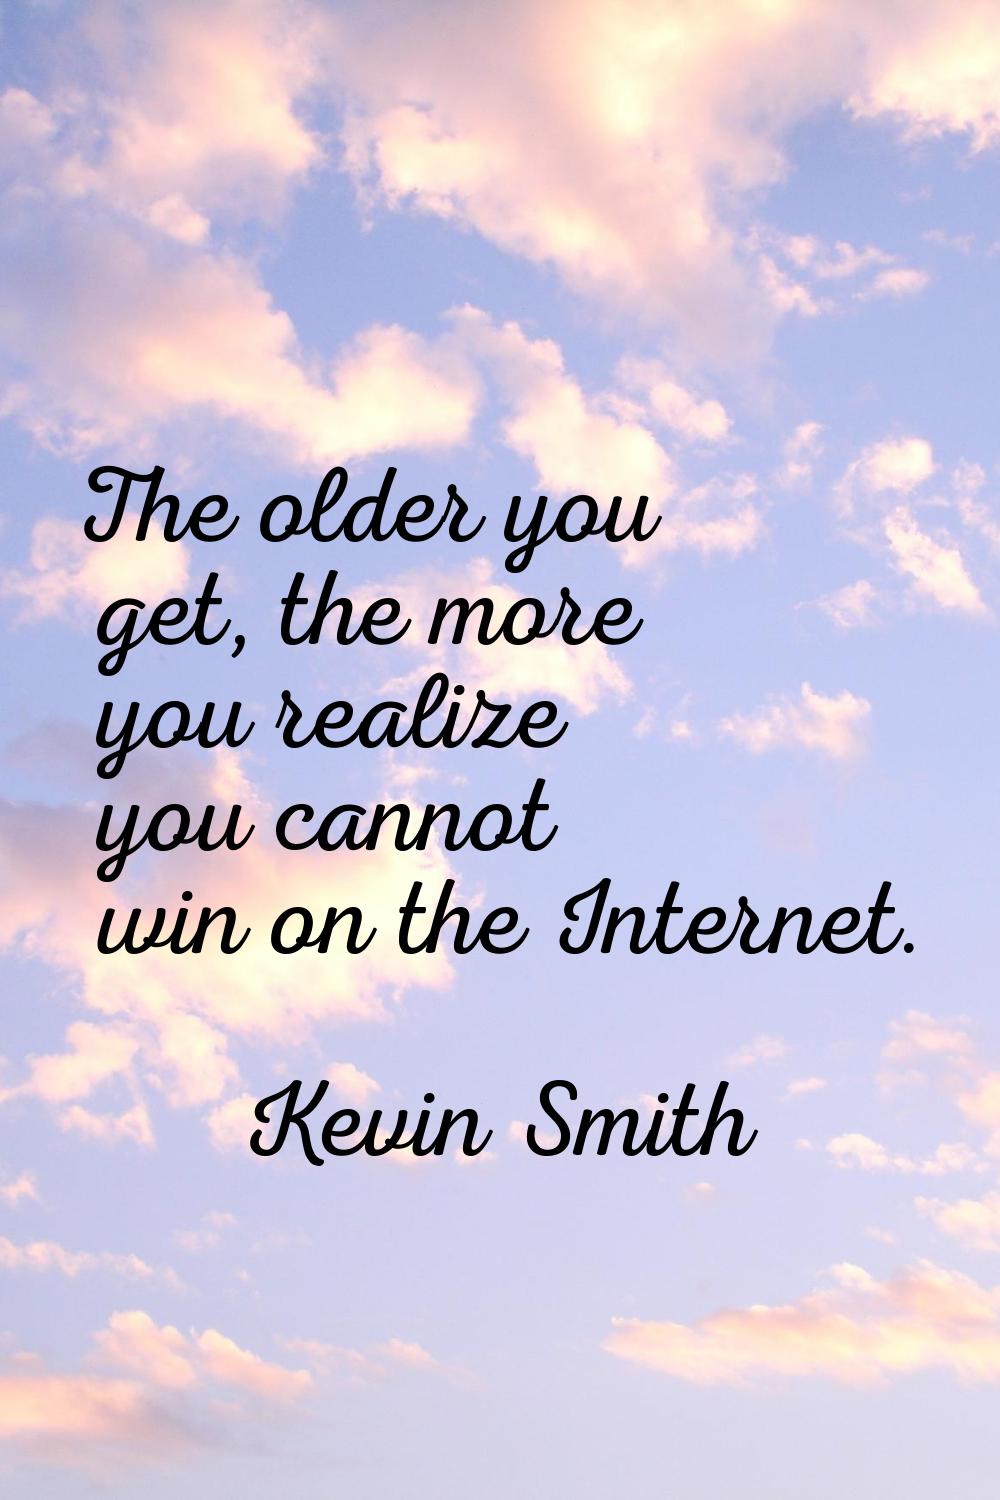 The older you get, the more you realize you cannot win on the Internet.